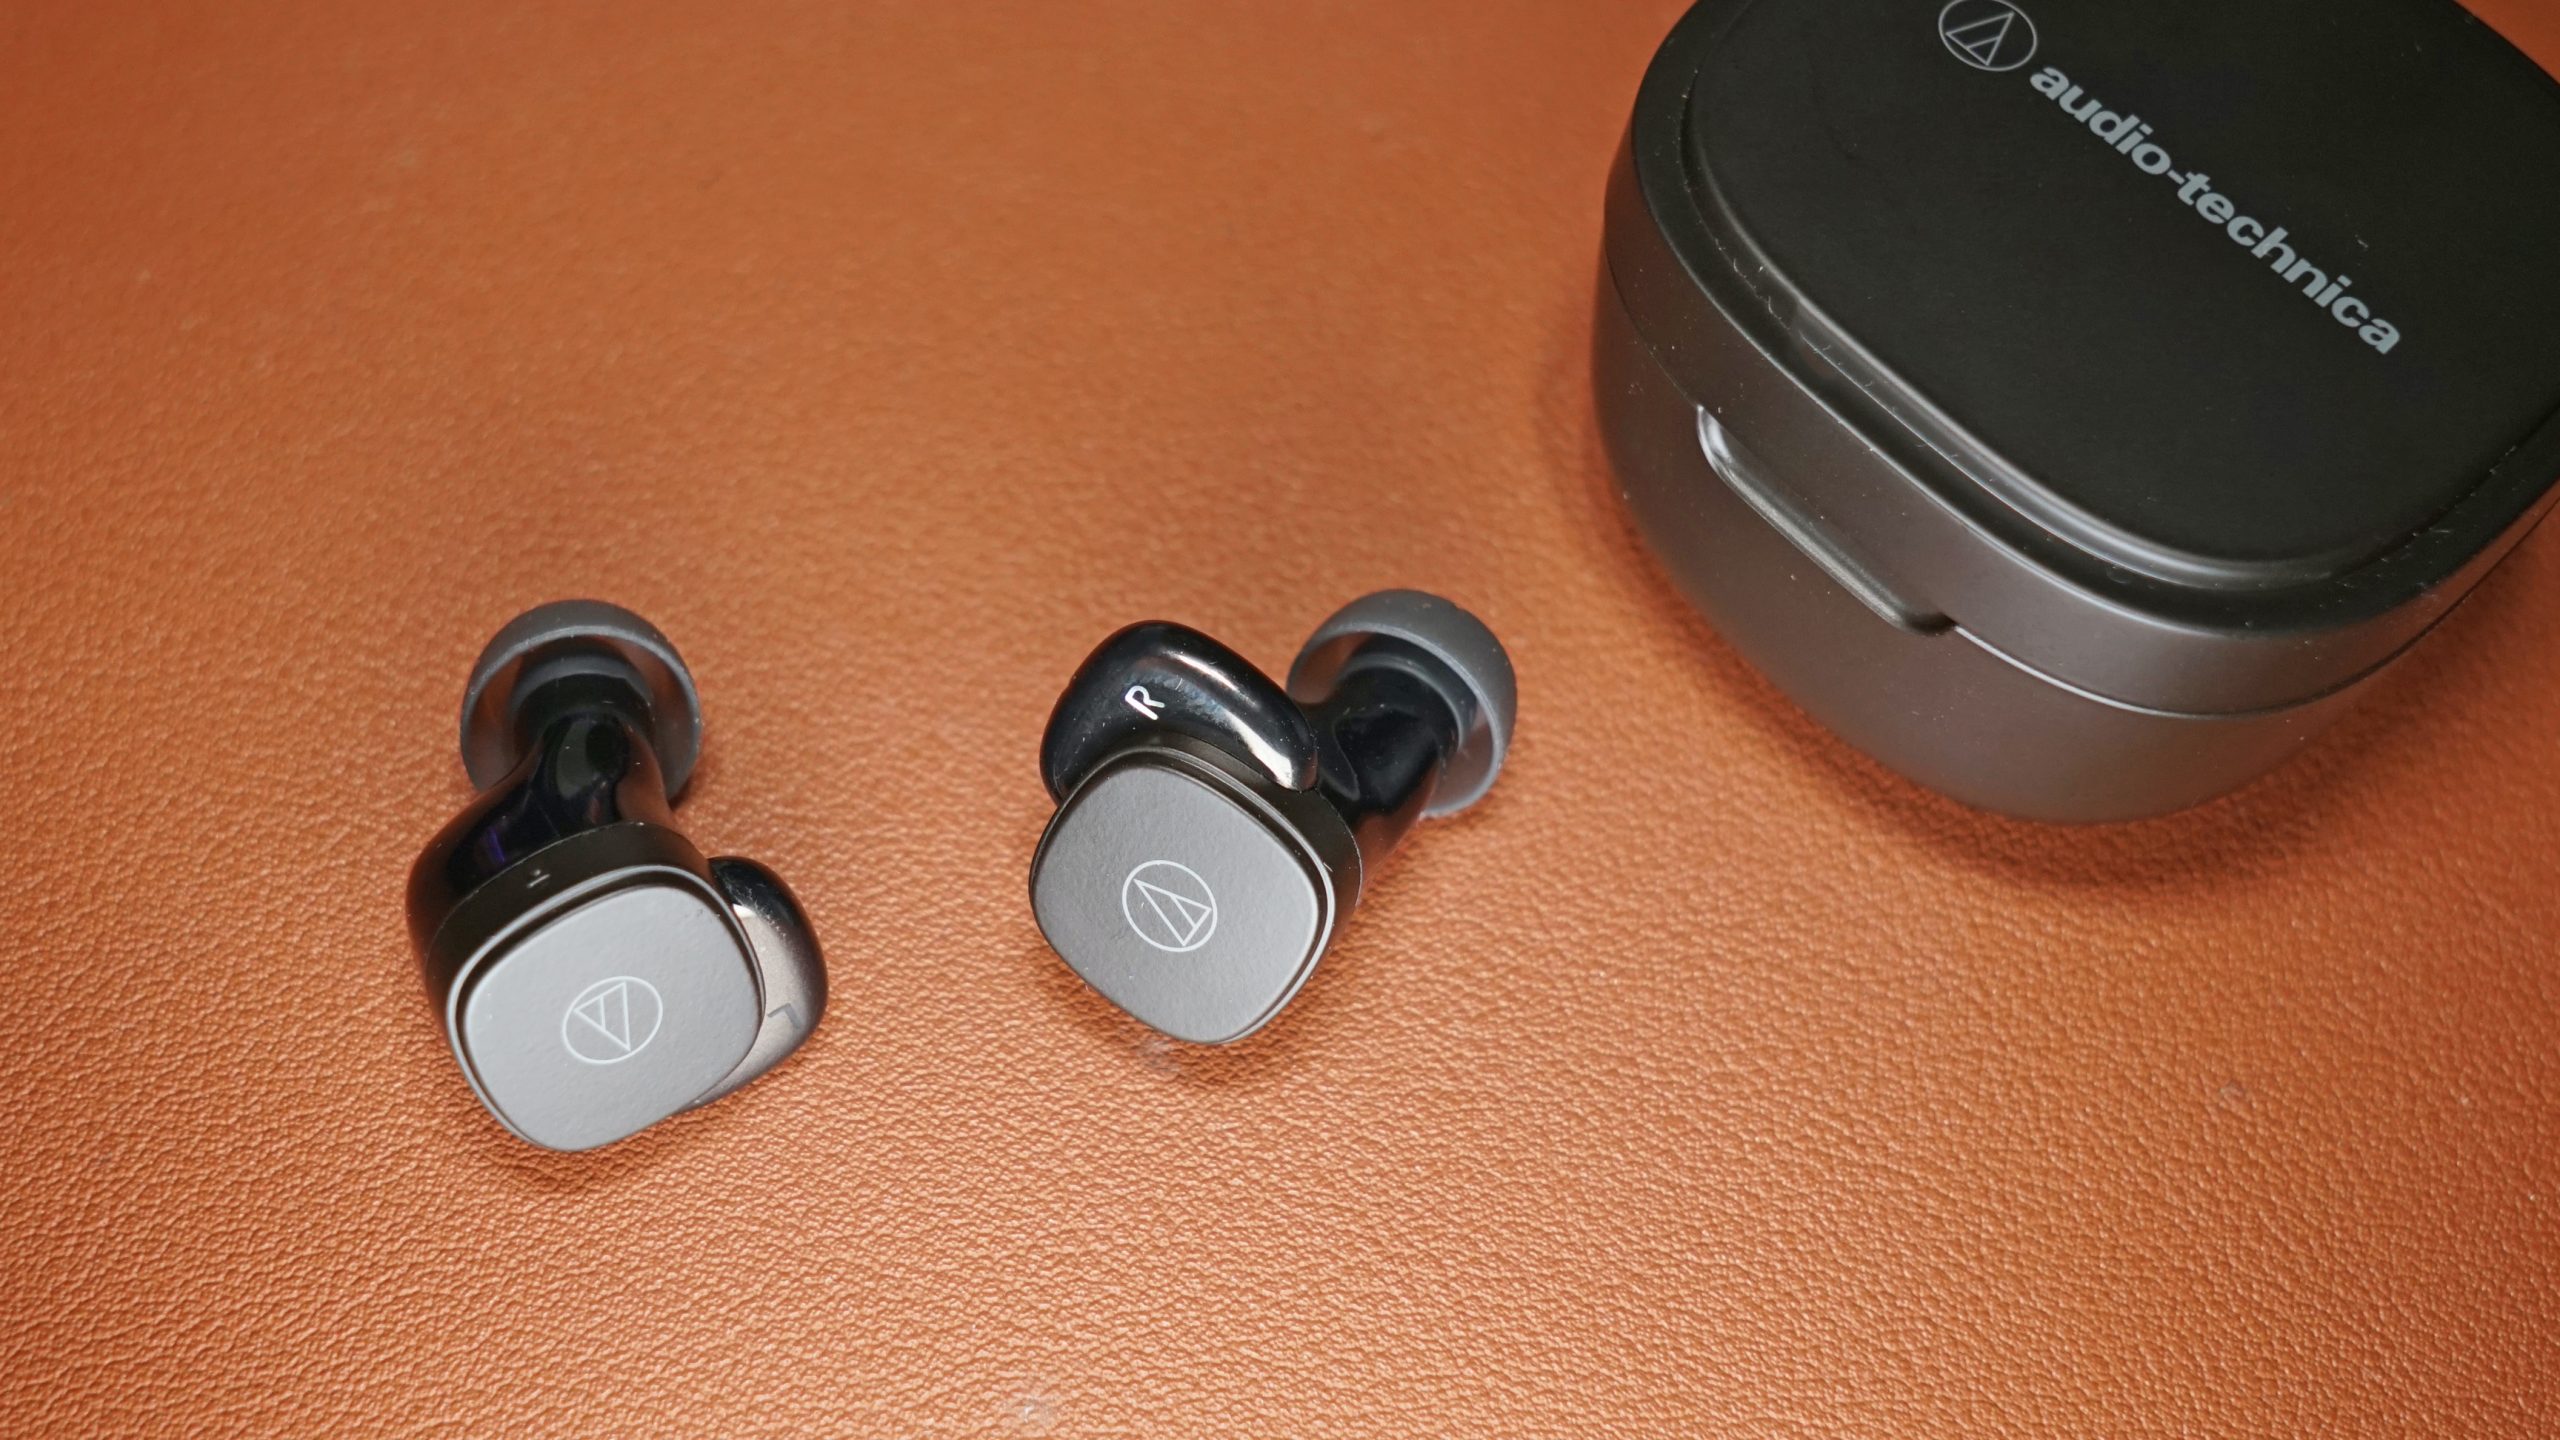 The Audio-Technica ATH-SQ1TW true wireless earbuds lay on a leather surface next to its charging case.